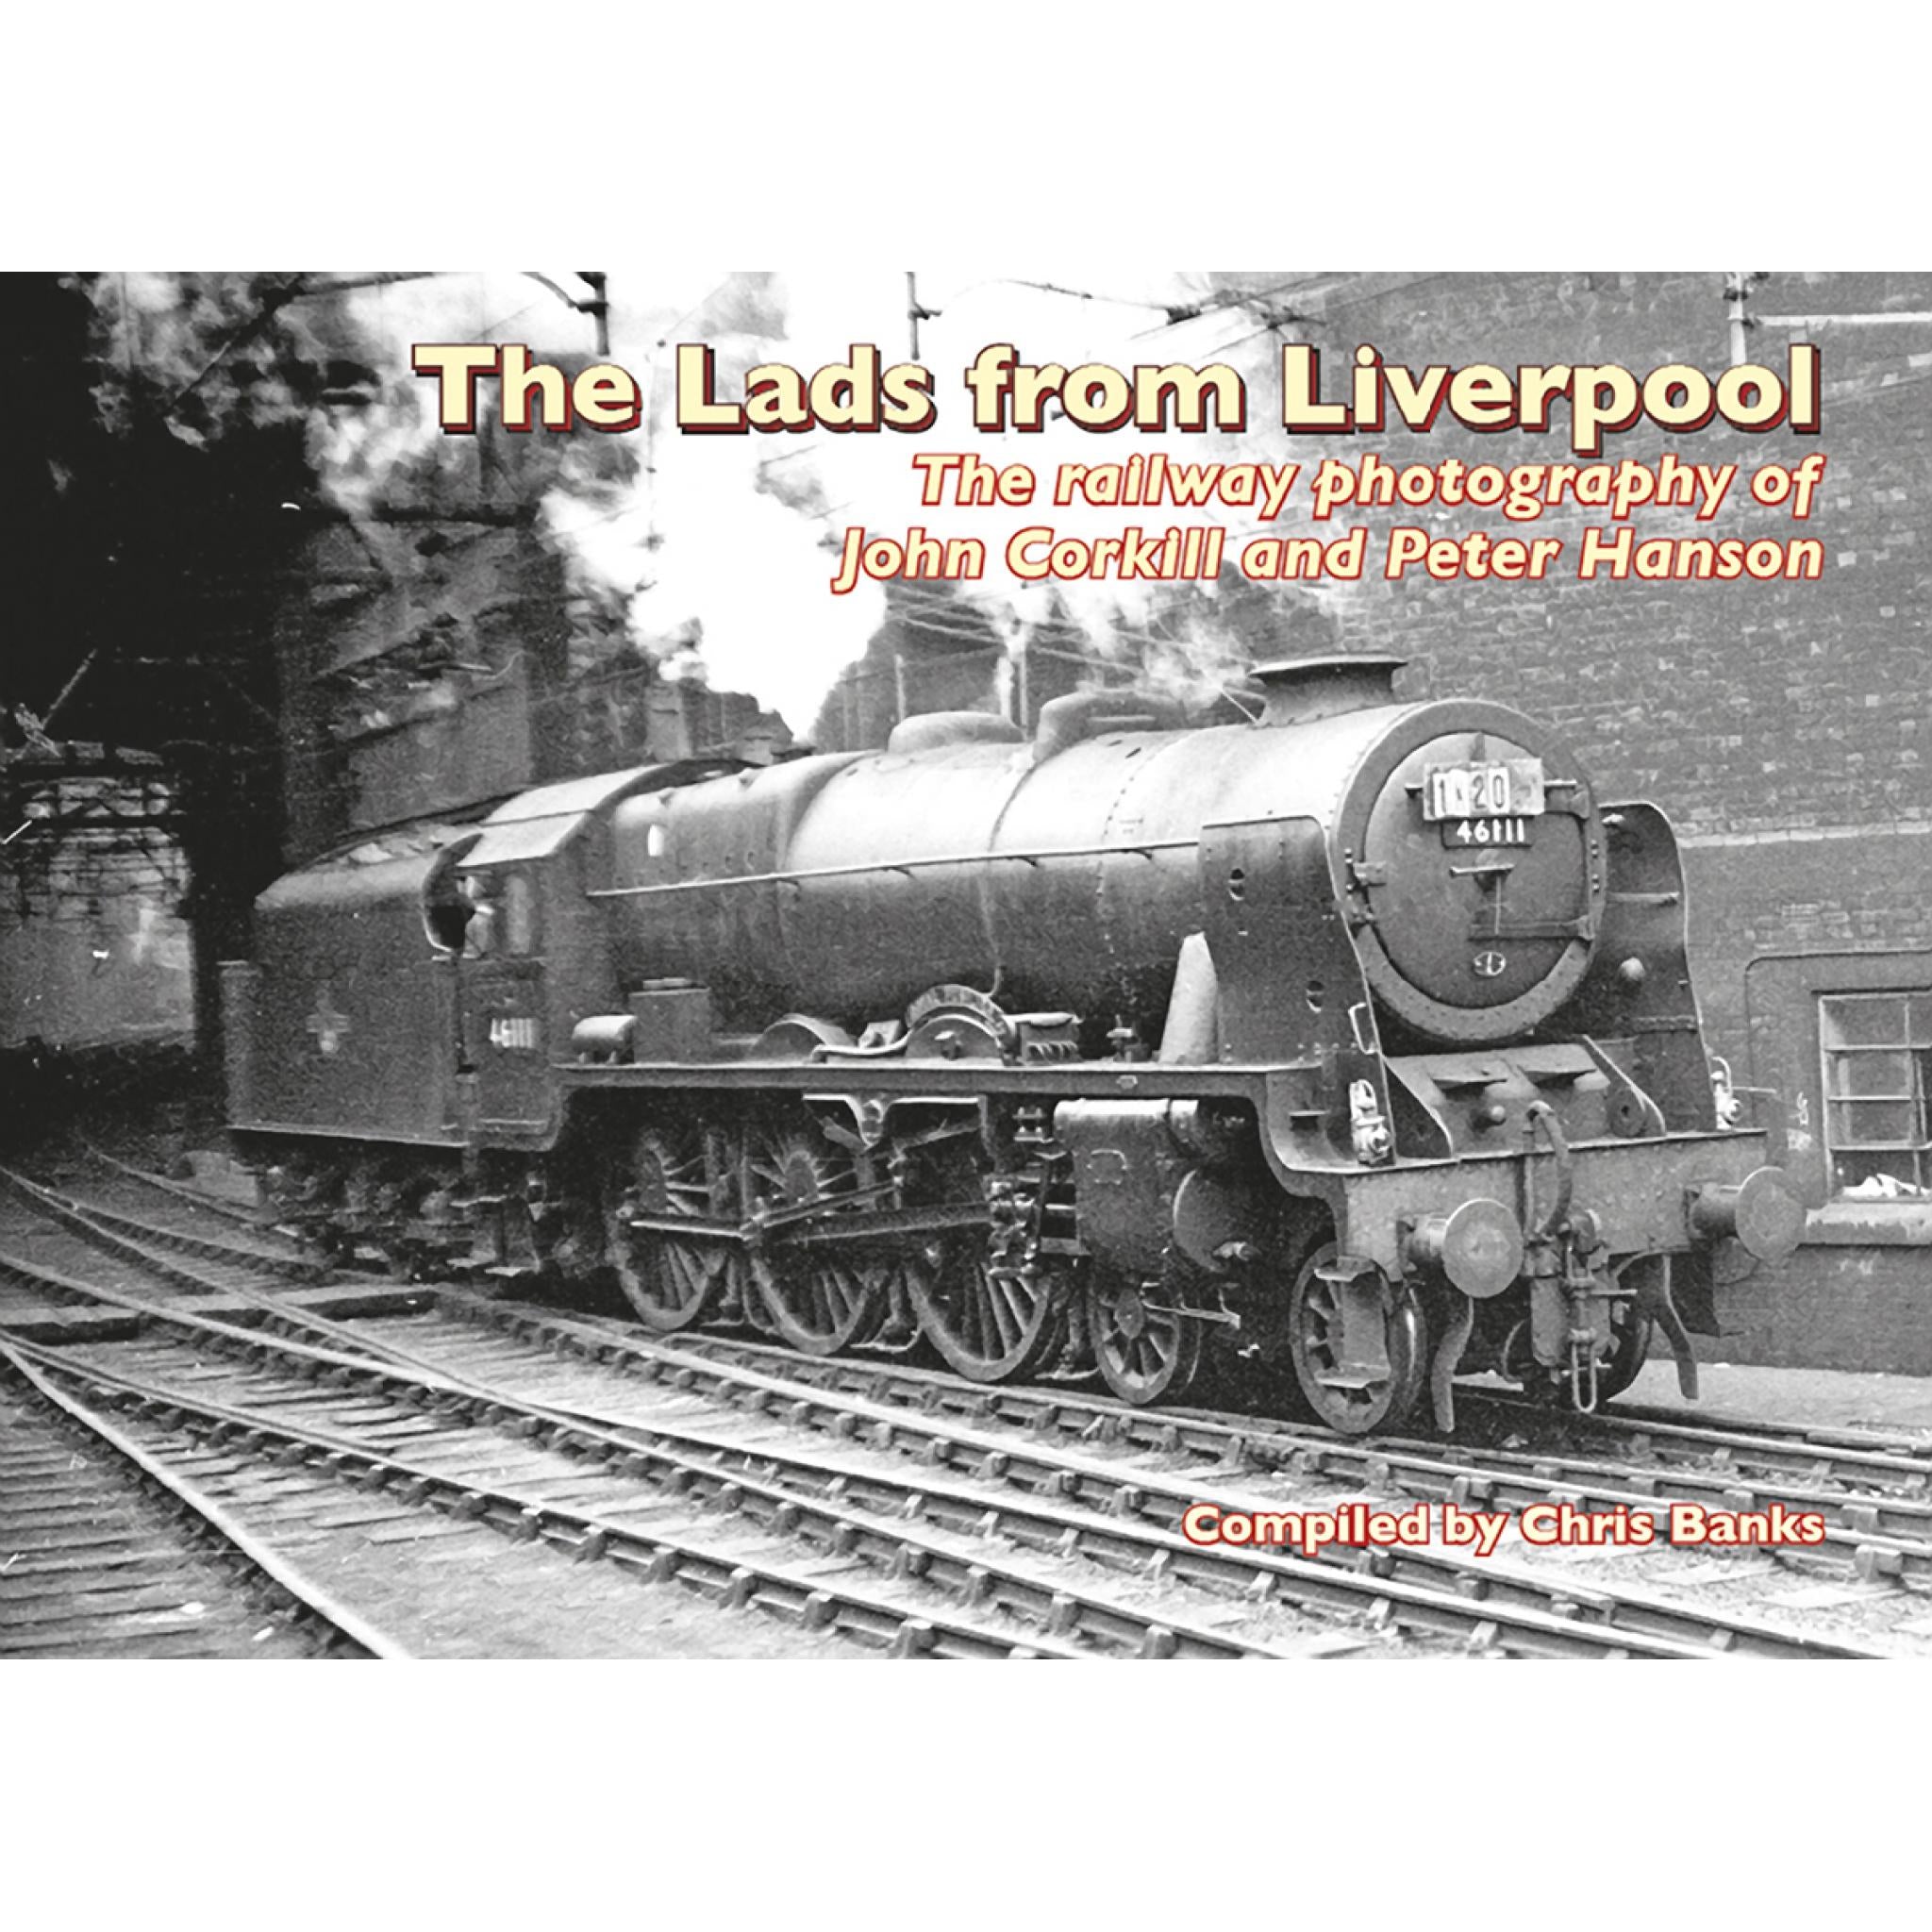 THE LADS FROM LIVERPOOL THE RAILWAY PHOTOGRAPHY OF JOHN CORKILL AND PETER HANSON